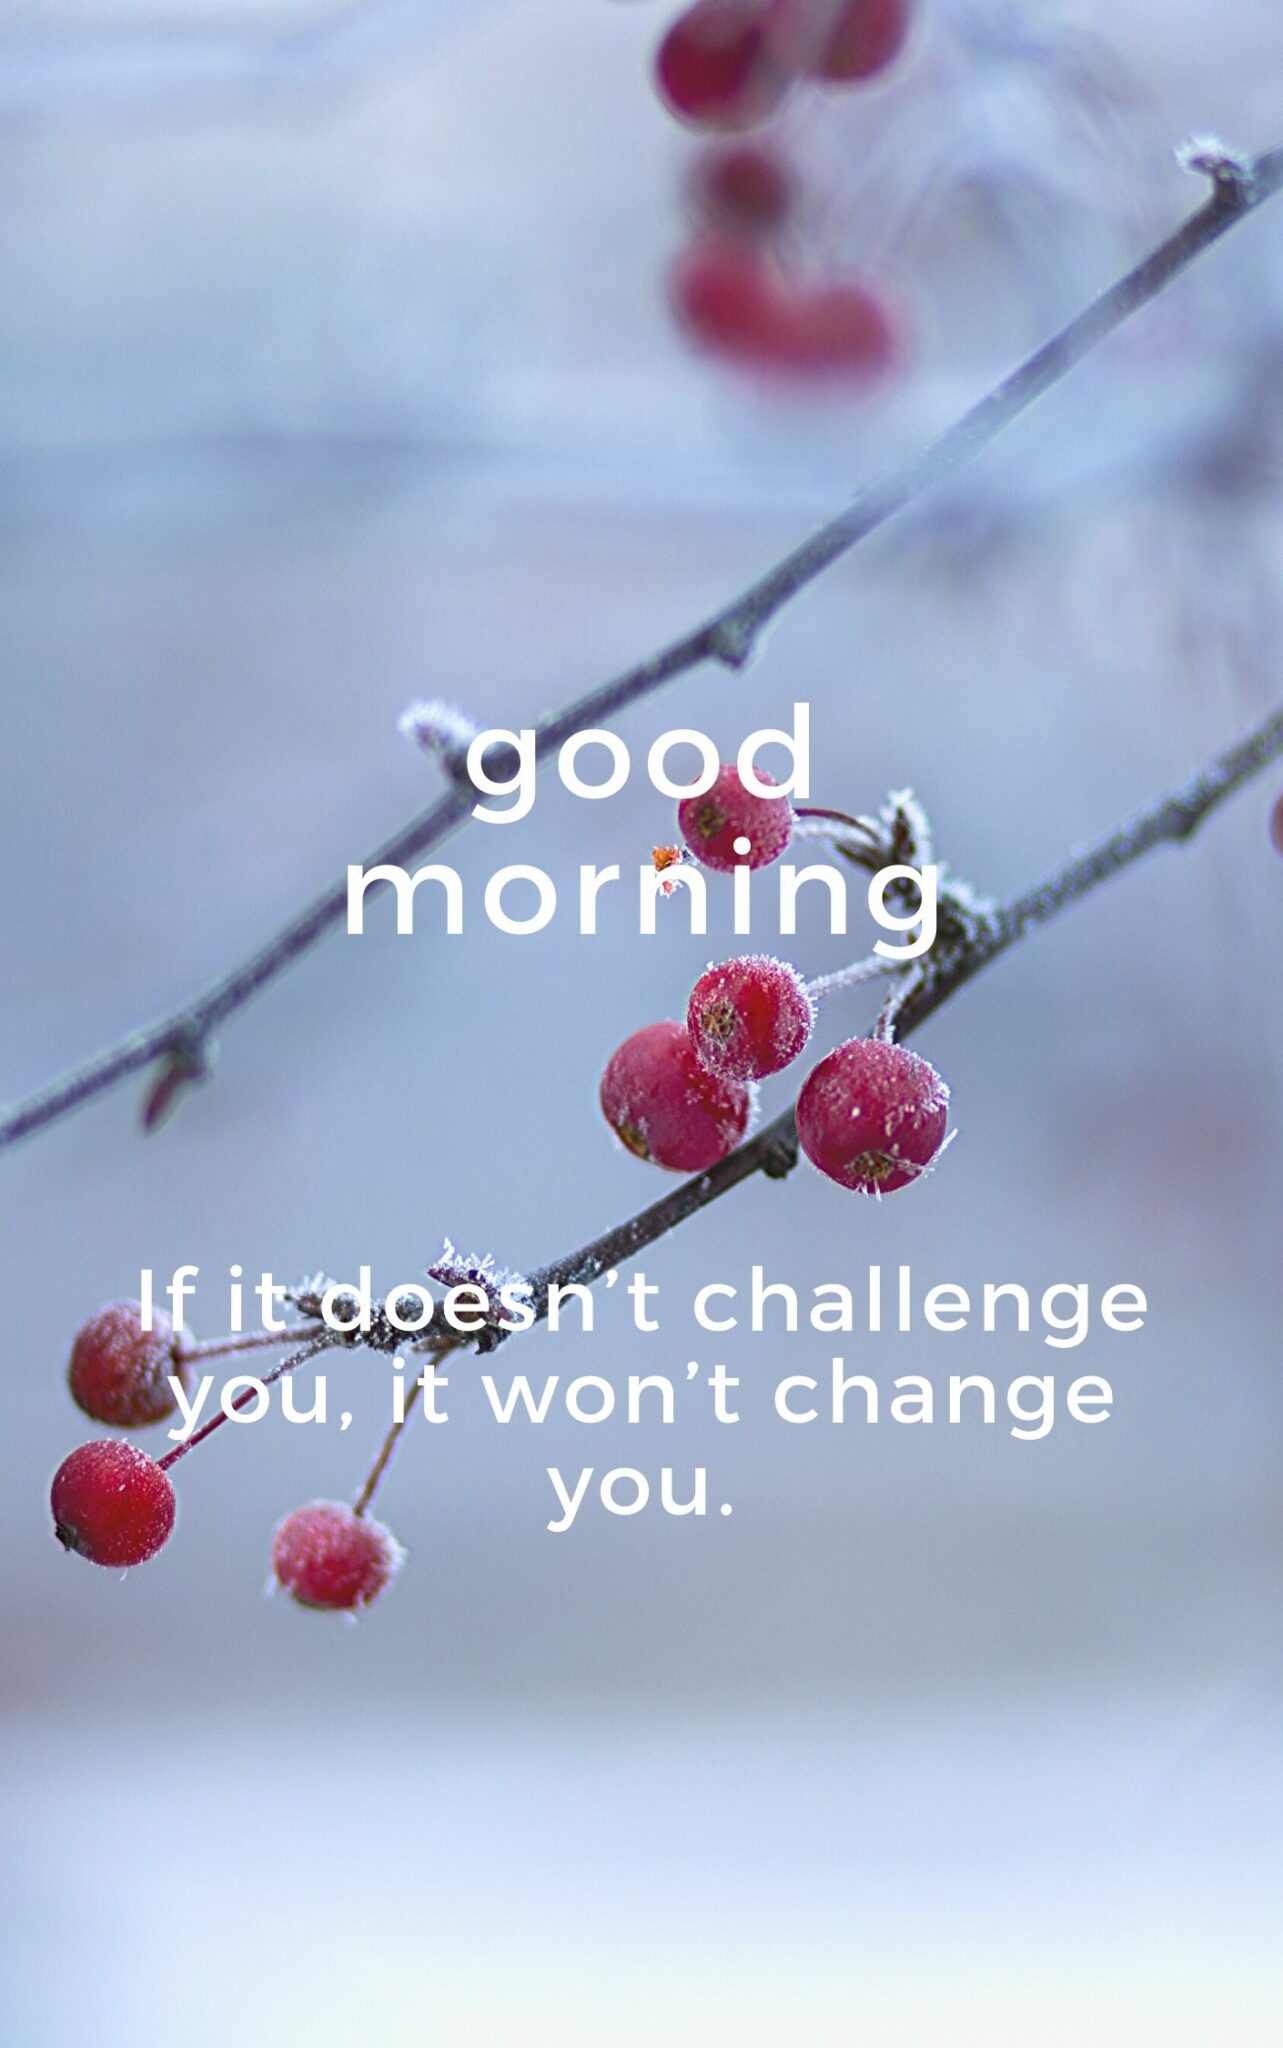 If it doesn’t challenge you, it won’t change you. Good Morning Wishes